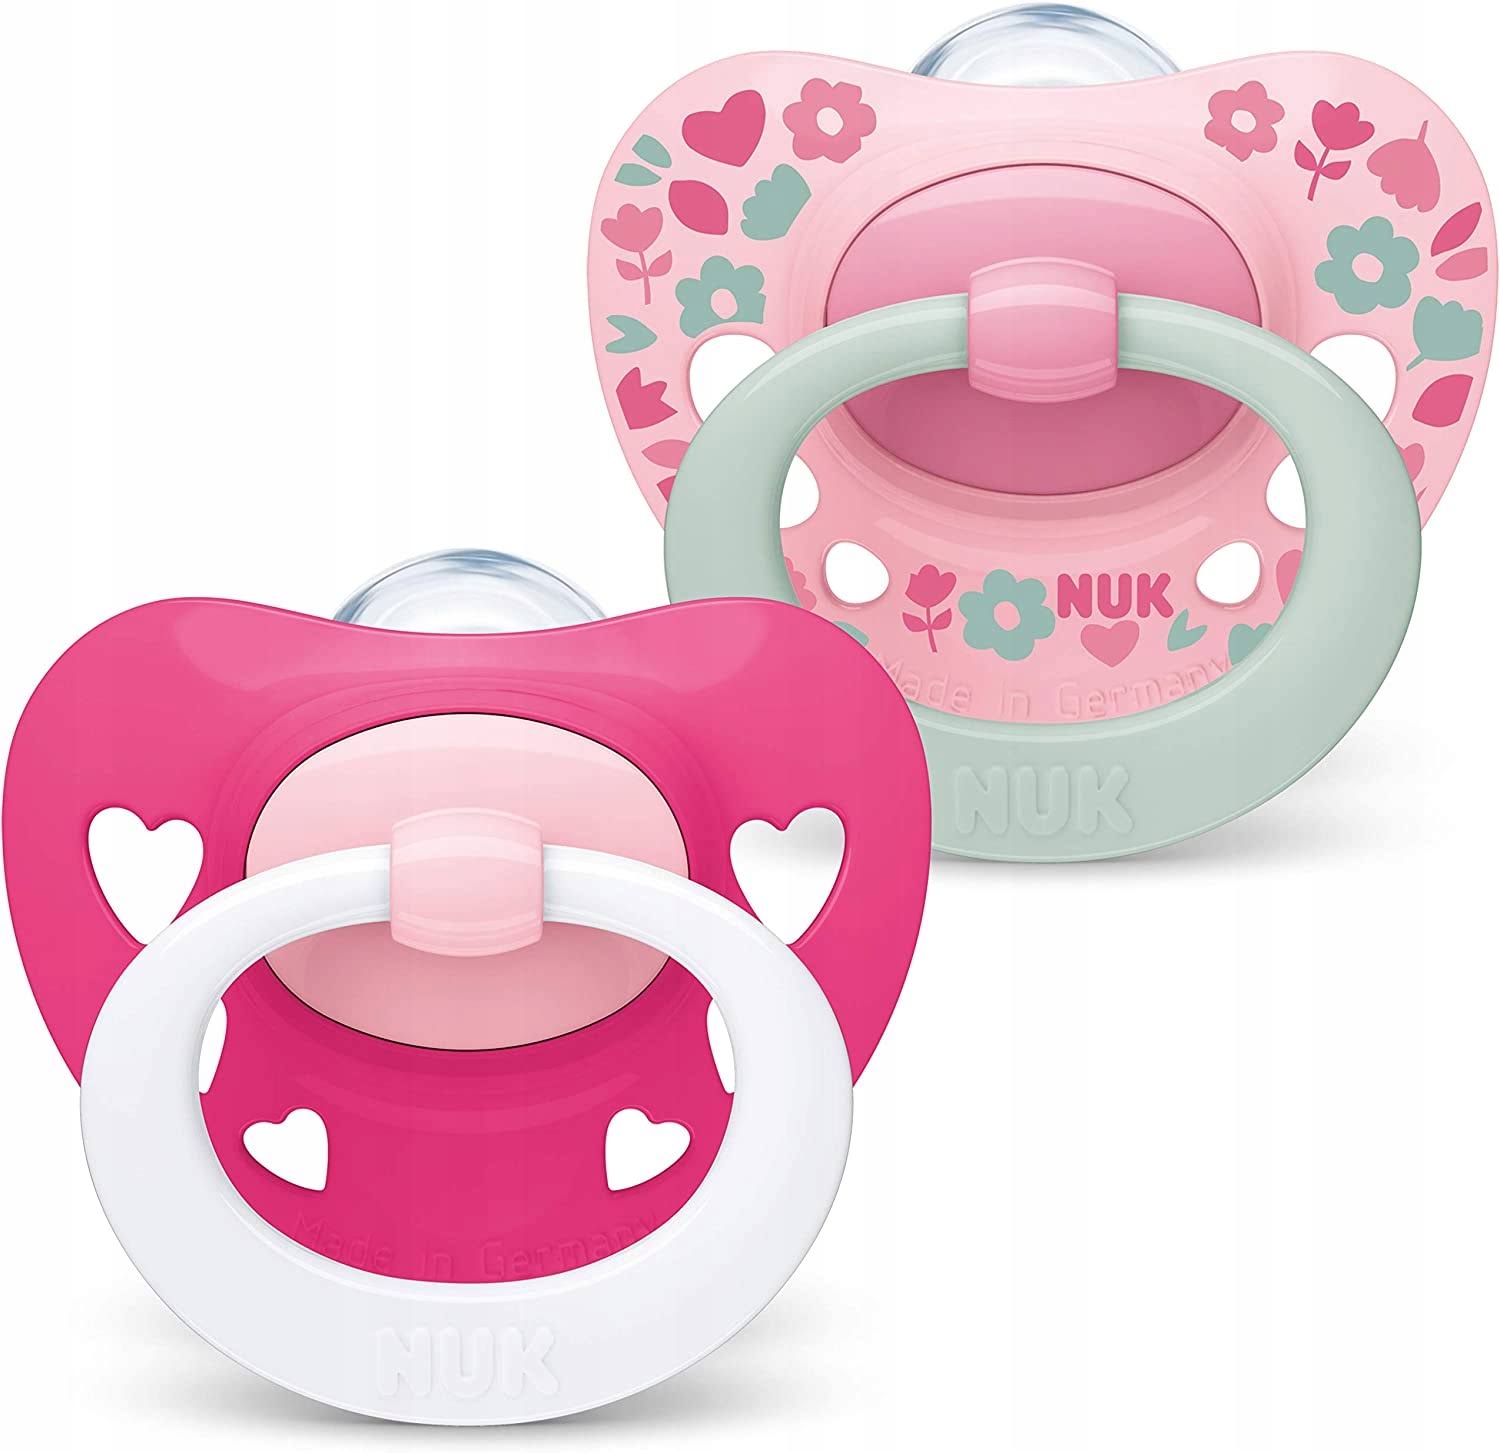 Nuk Signature Girl Silicone Soother 18-36Months